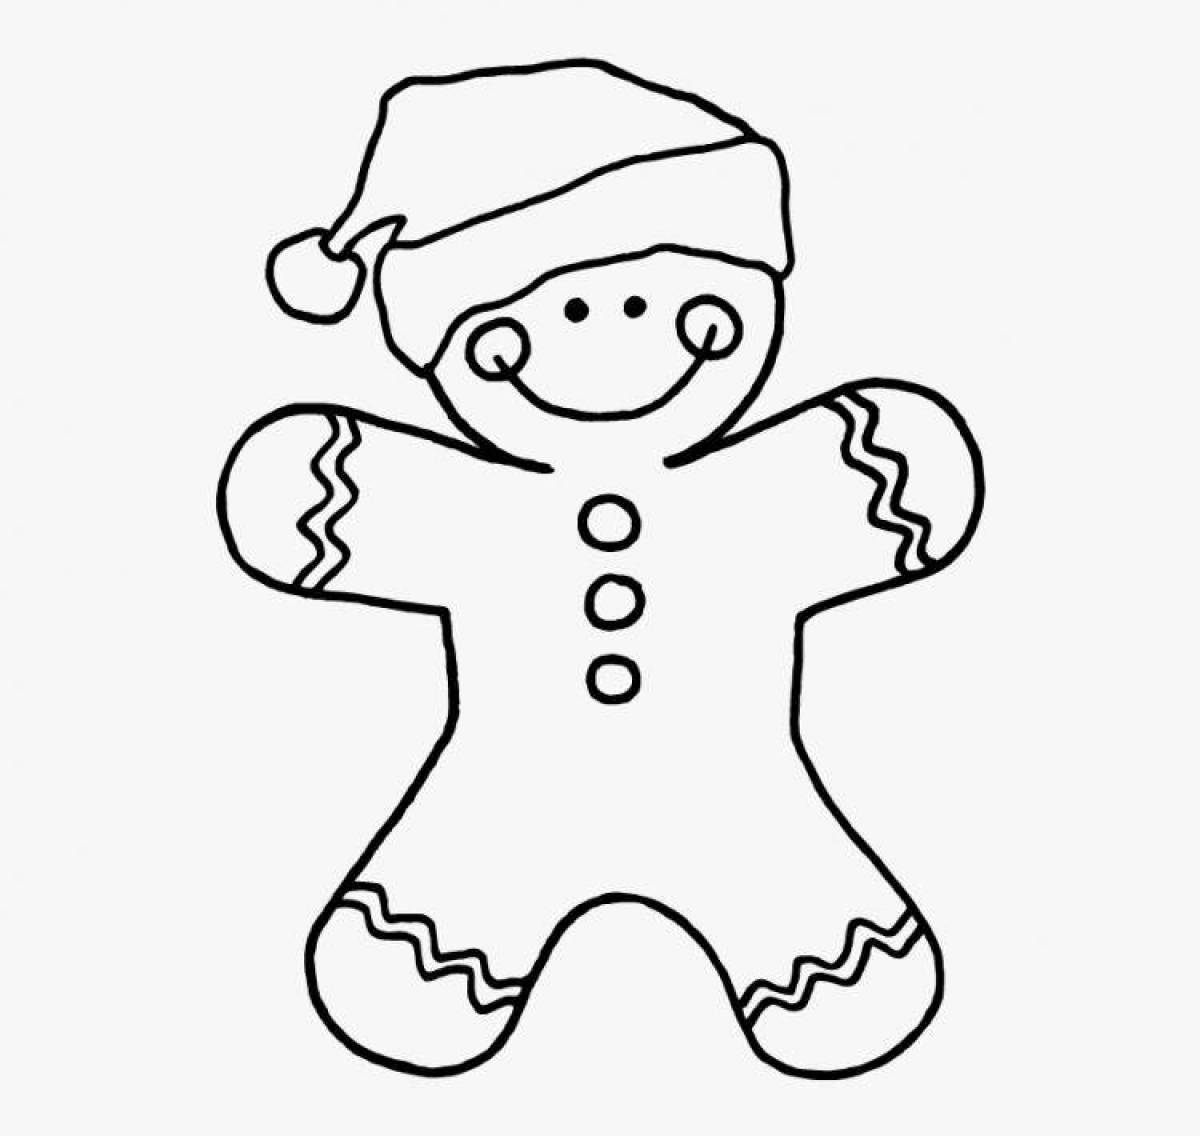 Awesome gingerbread coloring pages